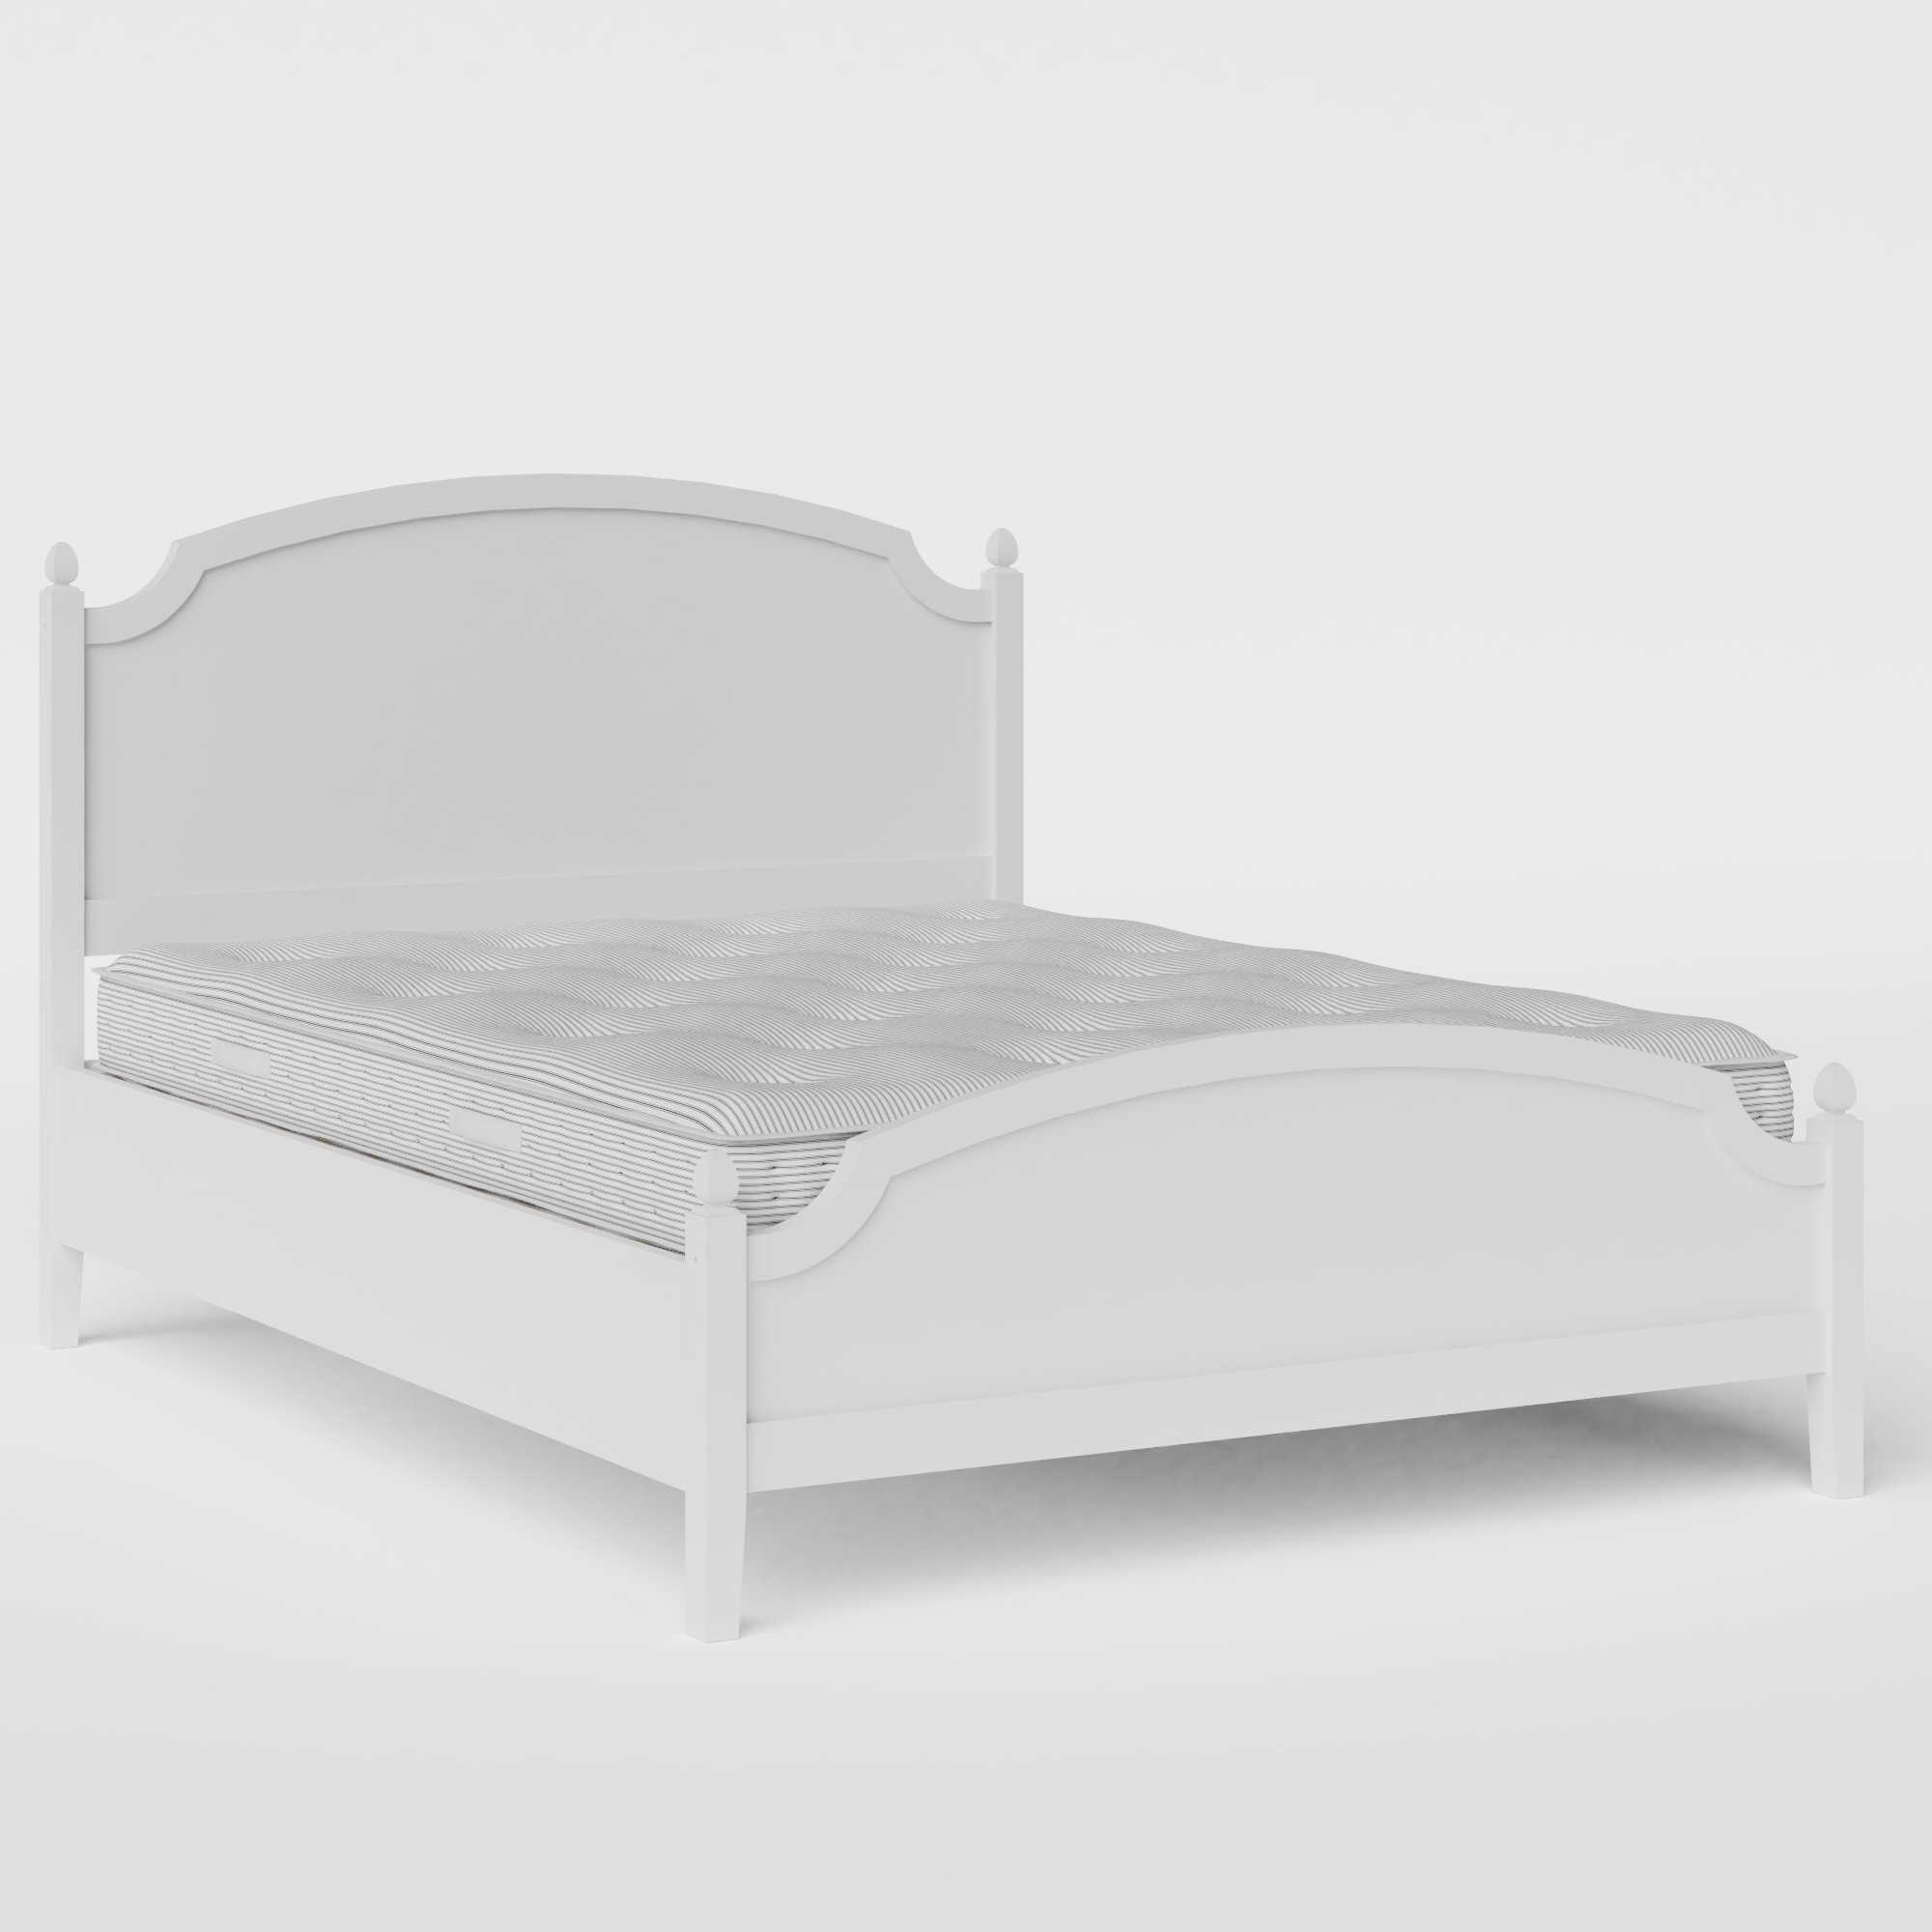 Kipling Low Footend Painted painted wood bed in white with Juno mattress